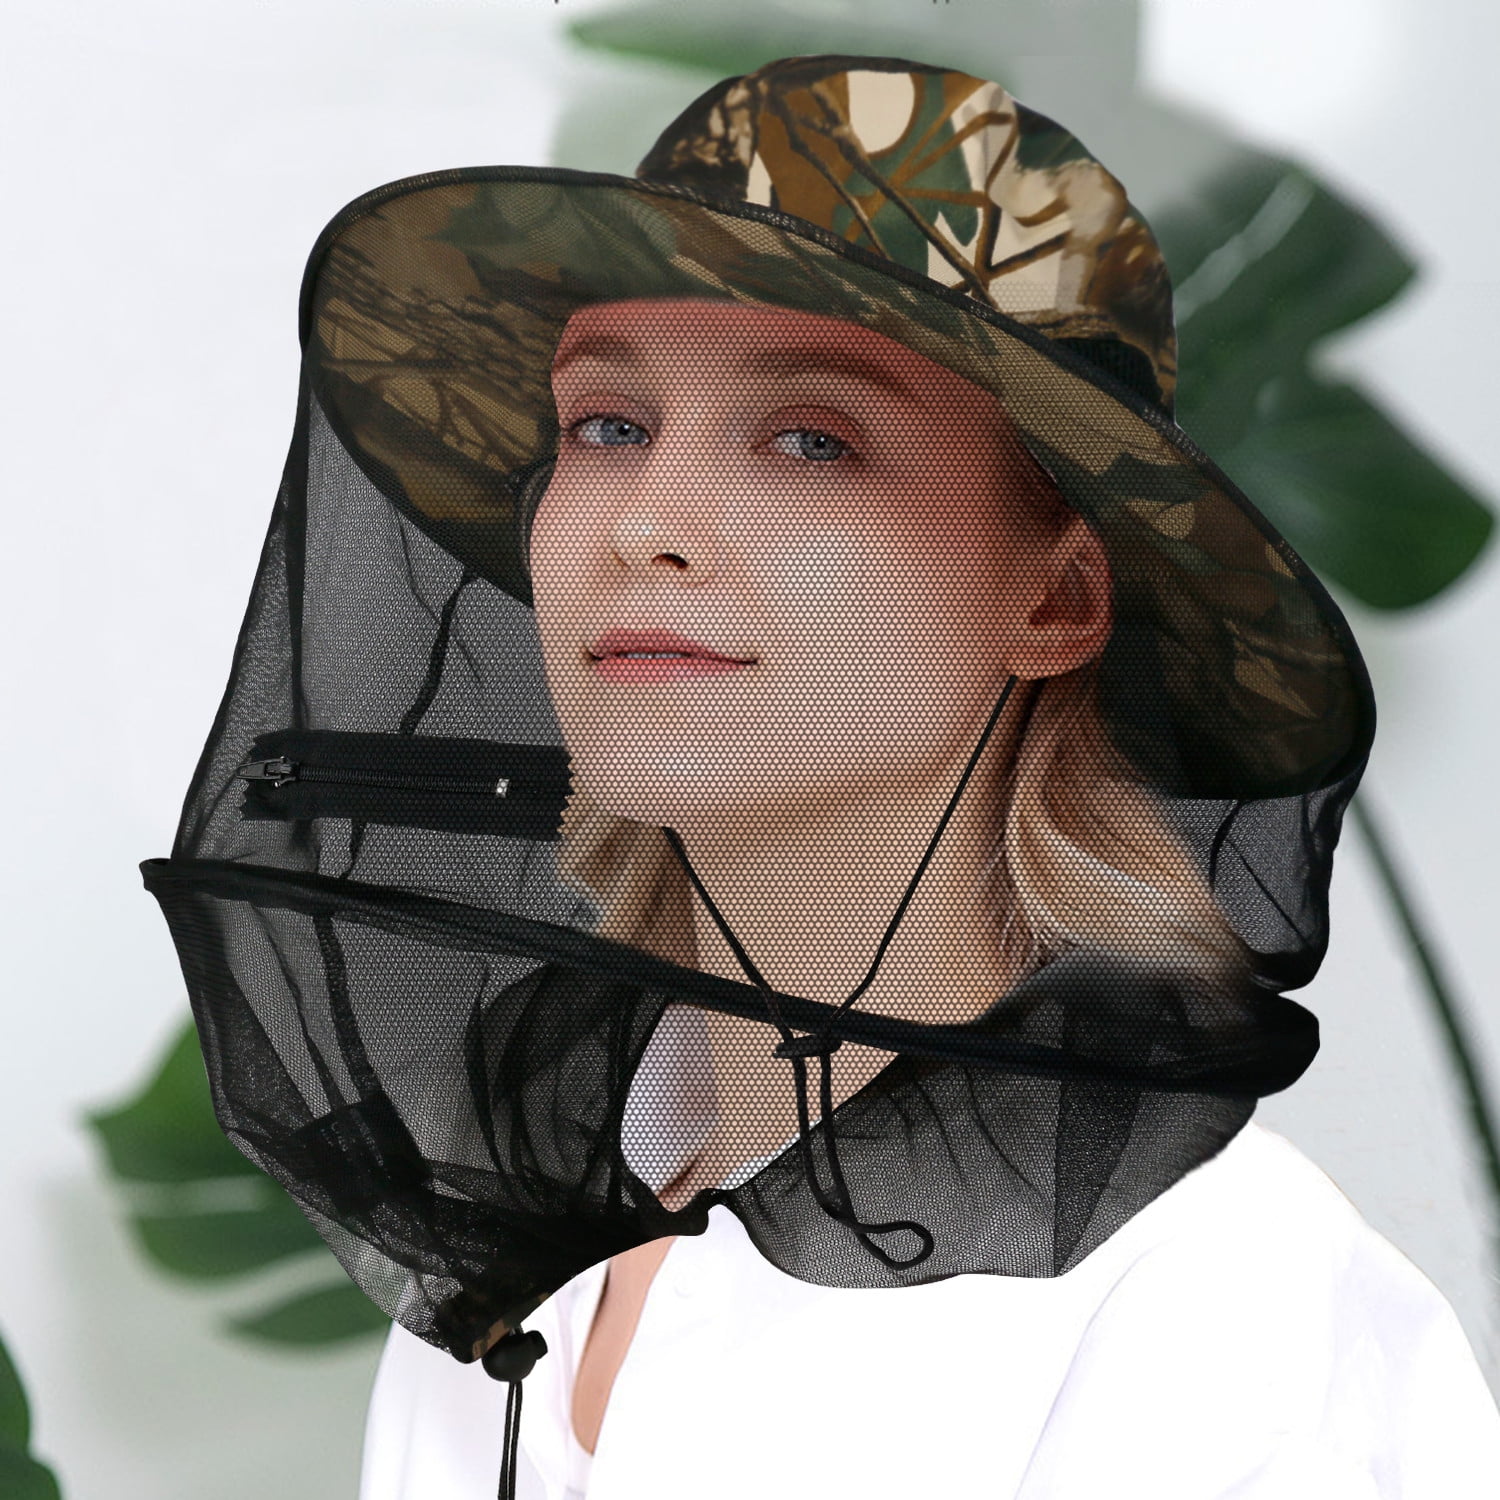 Midge mosquito hat outdoor insect hat fishing insect bee fly mozzie bug mesh4H 